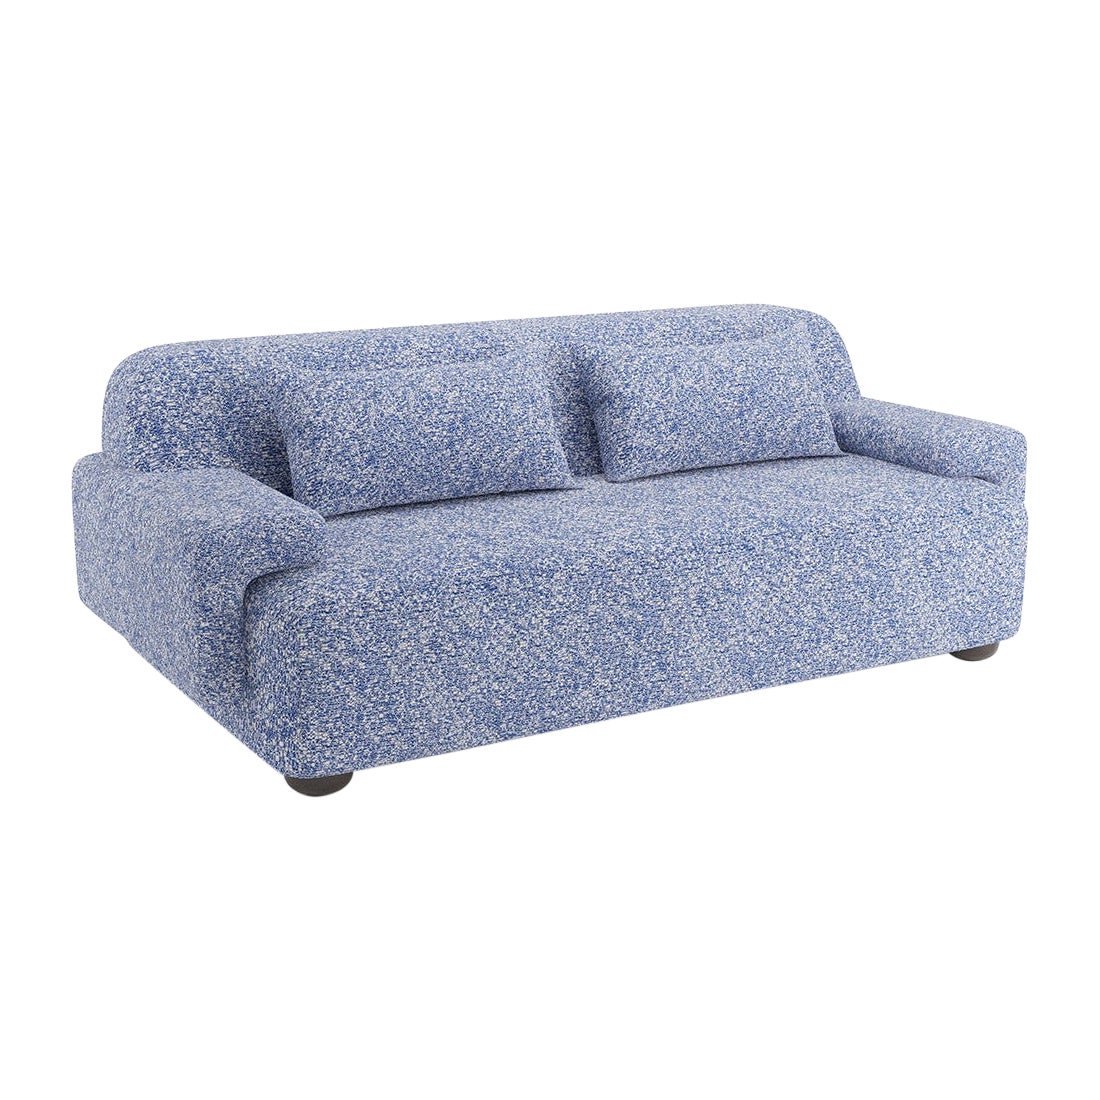 Popus Editions Lena 2.5 Seater Sofa in Ocean Zanzi Linen with Wool Blend Fabric For Sale